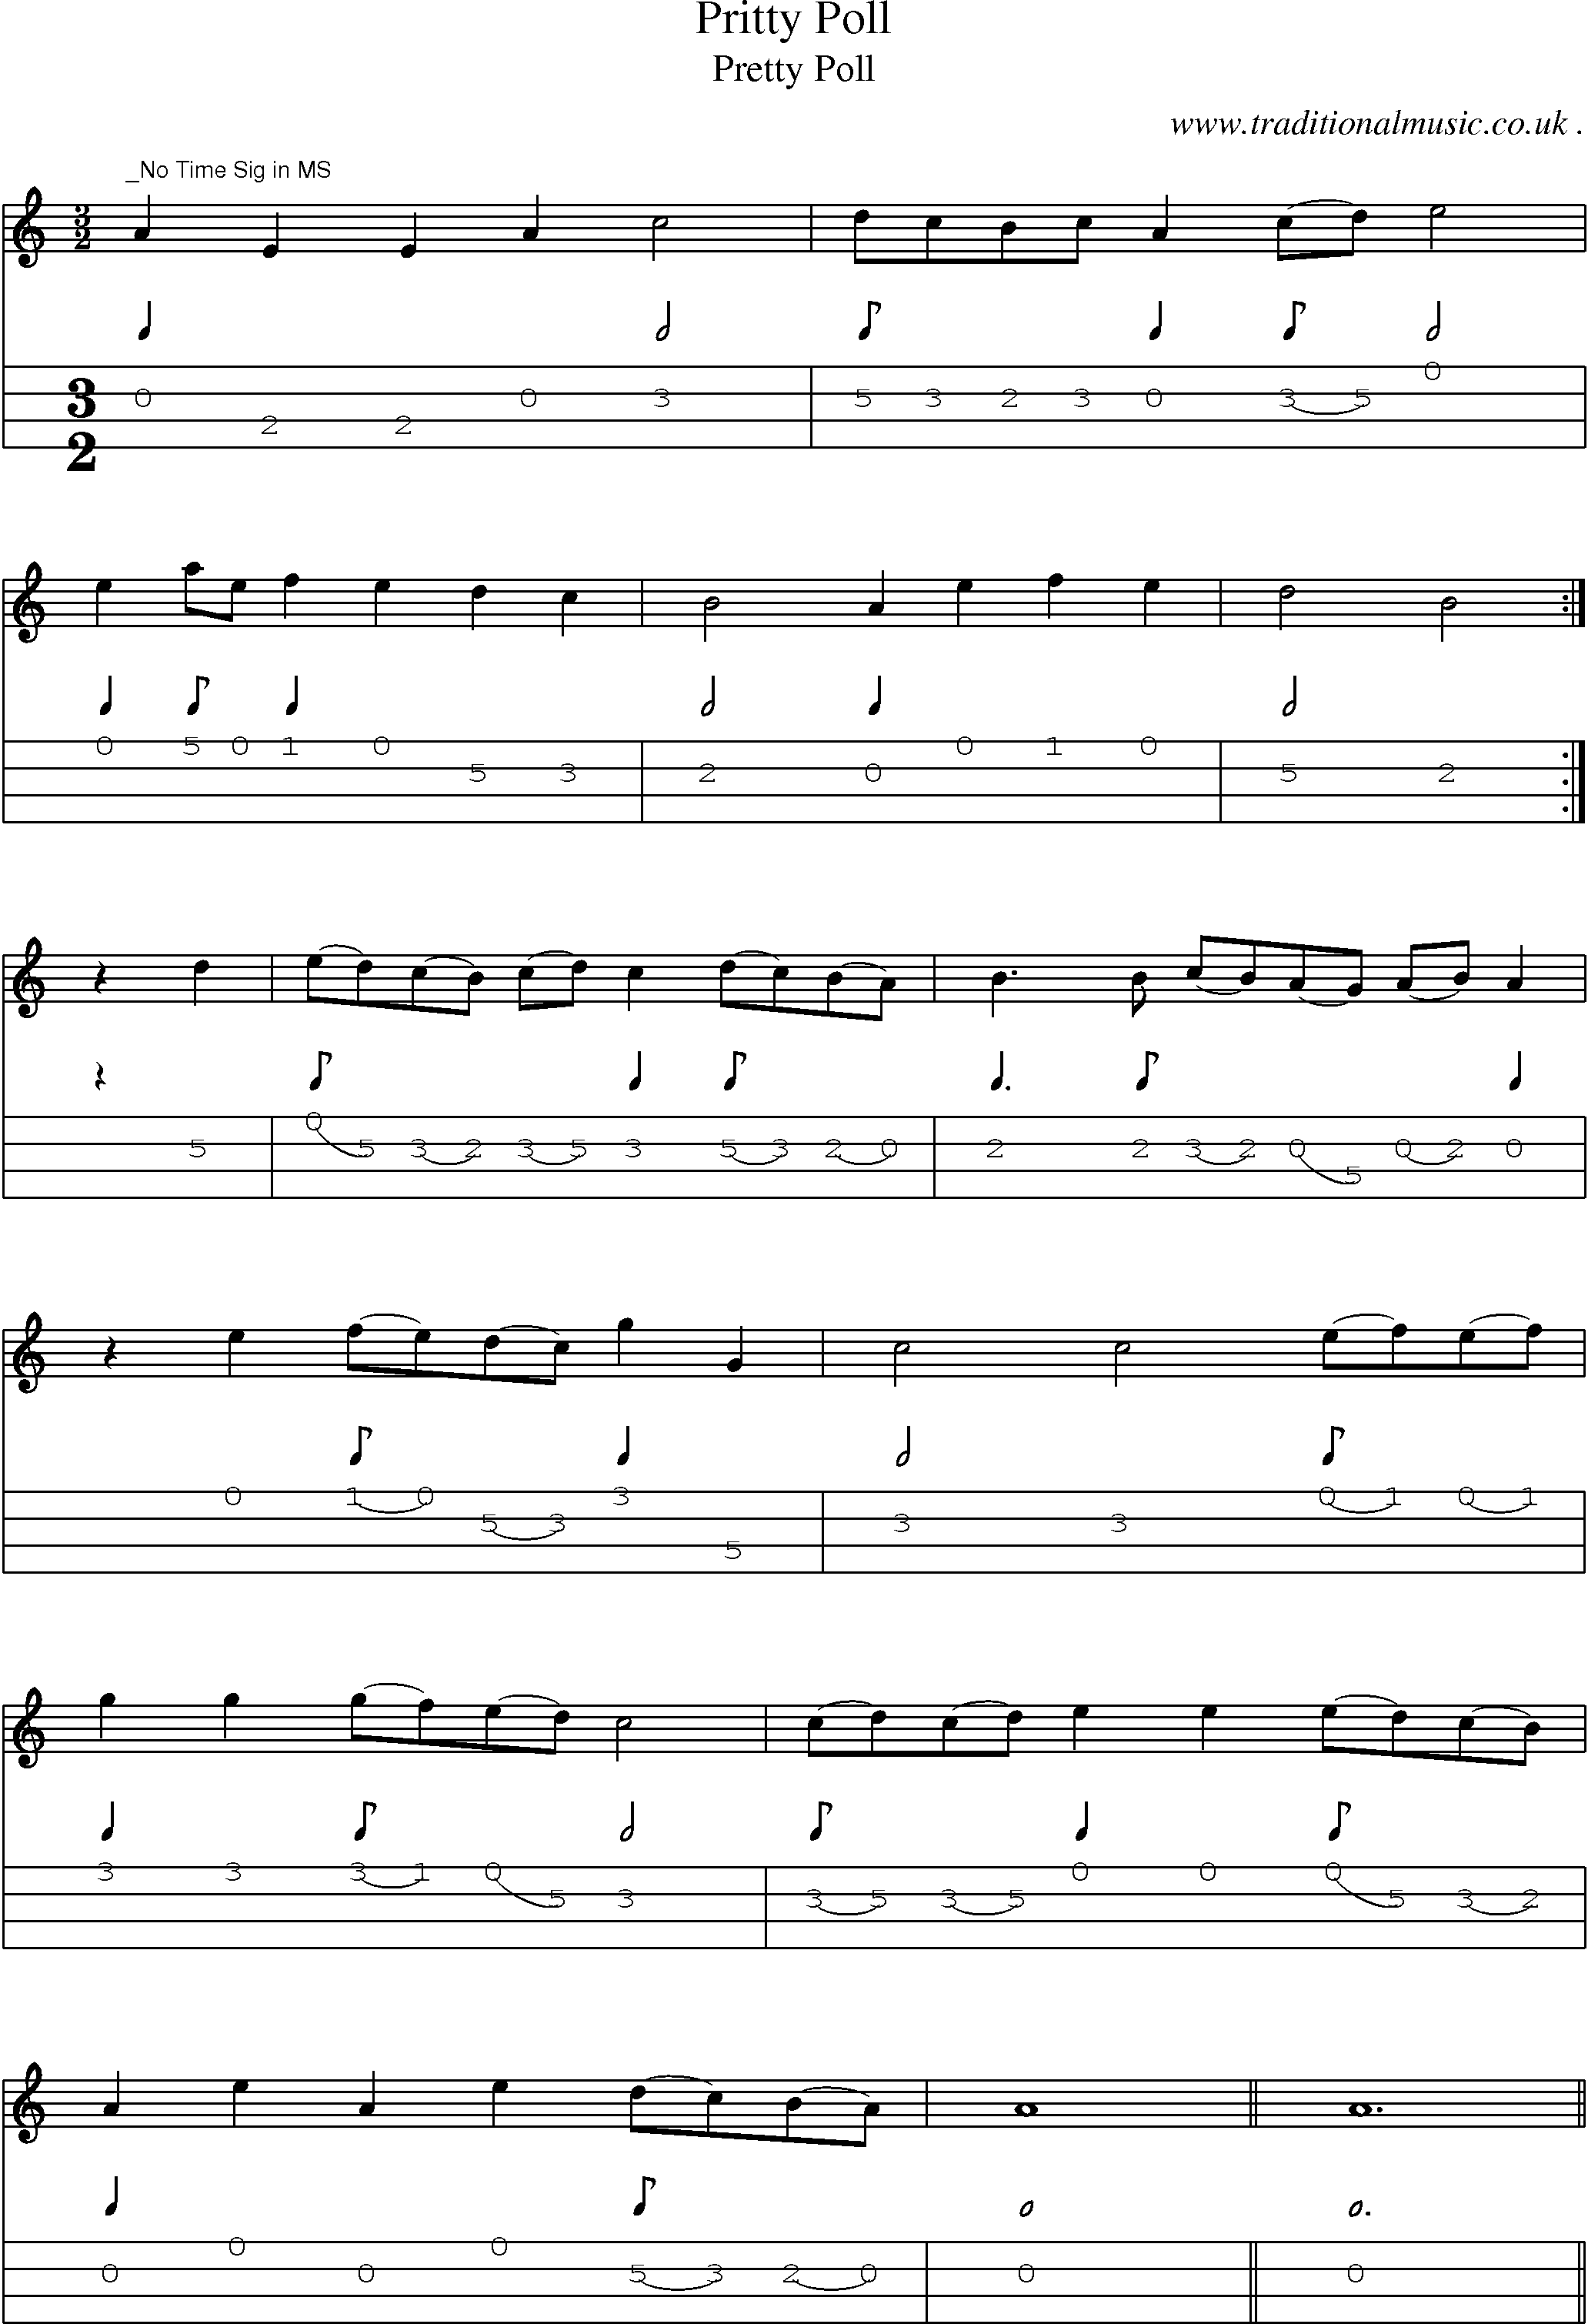 Sheet-Music and Mandolin Tabs for Pritty Poll